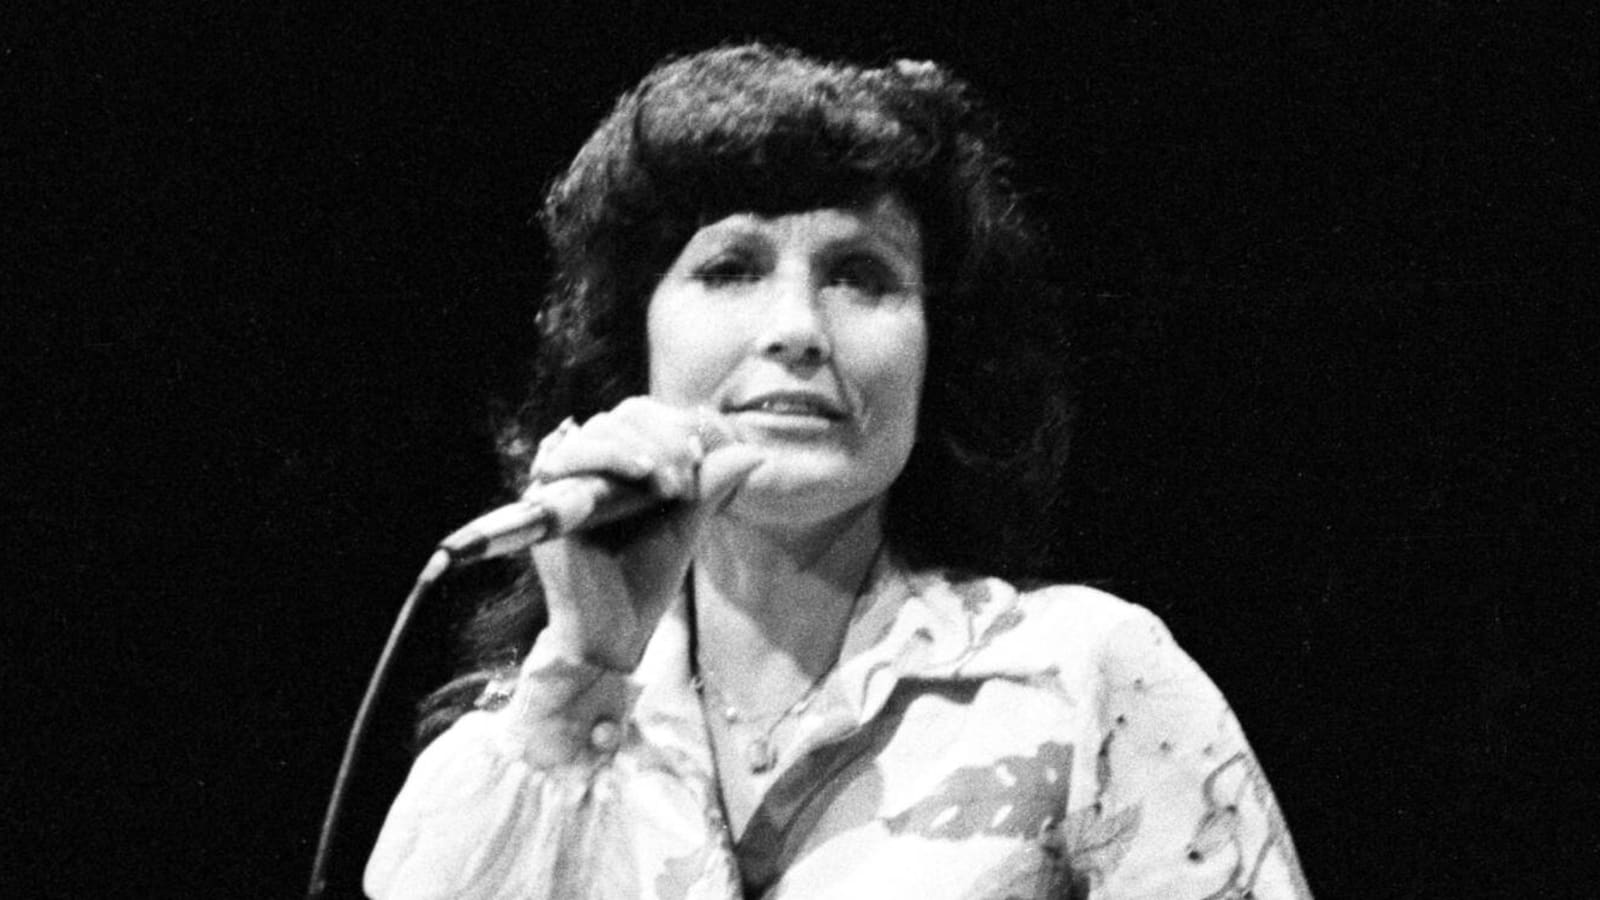 21 of country music's greatest voices